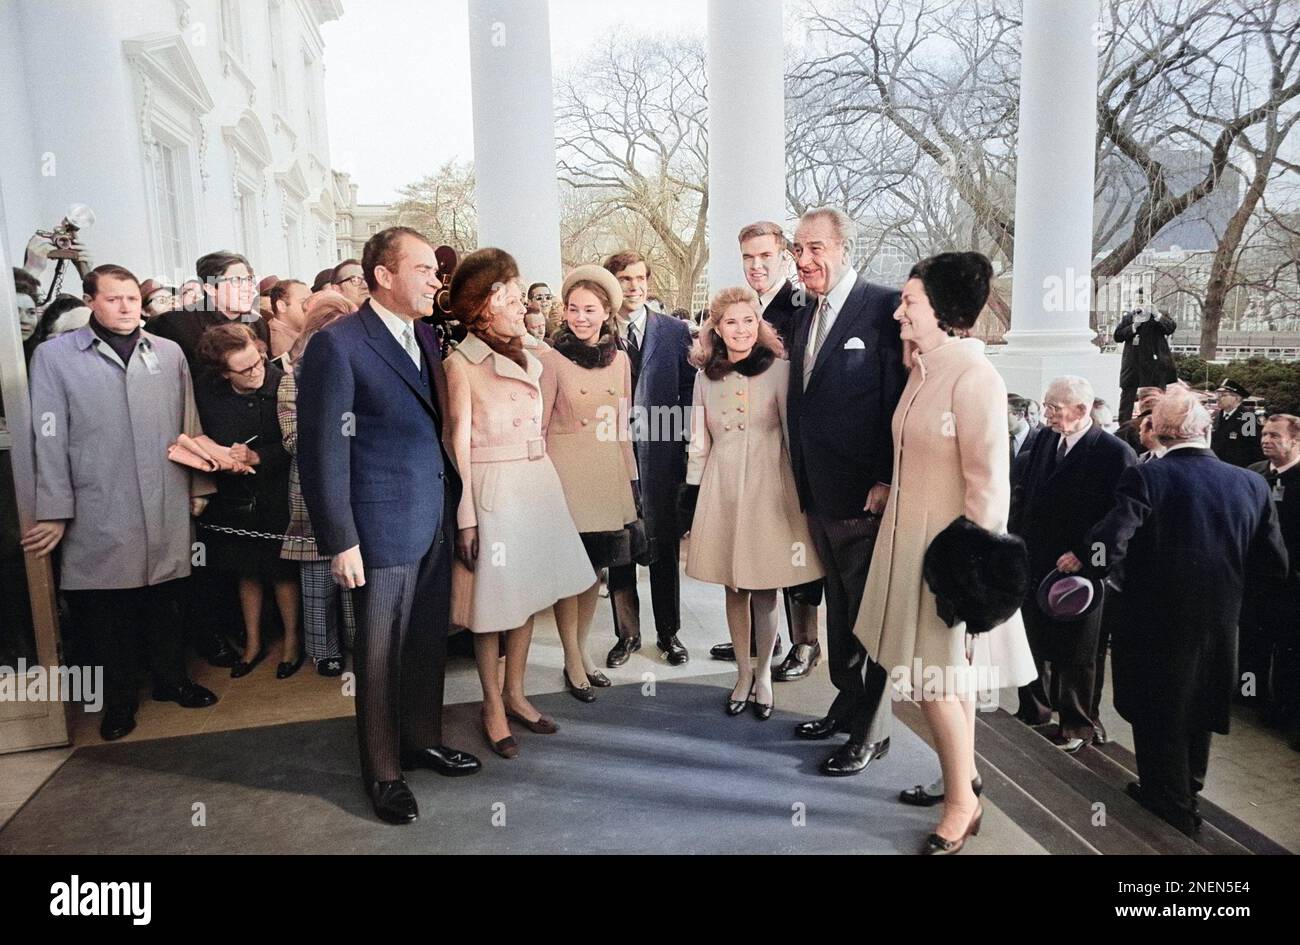 U.S. President-Elect Richard Nixon, Wife Pat Nixon and family being greeted by Former U.S. President Lyndon Johnson and First Lady Ladybird Johnson at White House prior to Nixon's Inauguration, Washington DC, USA, John T. Bledsoe, U.S. News & World Report Magazine Photograph Collection, January 20, 1969 Stock Photo